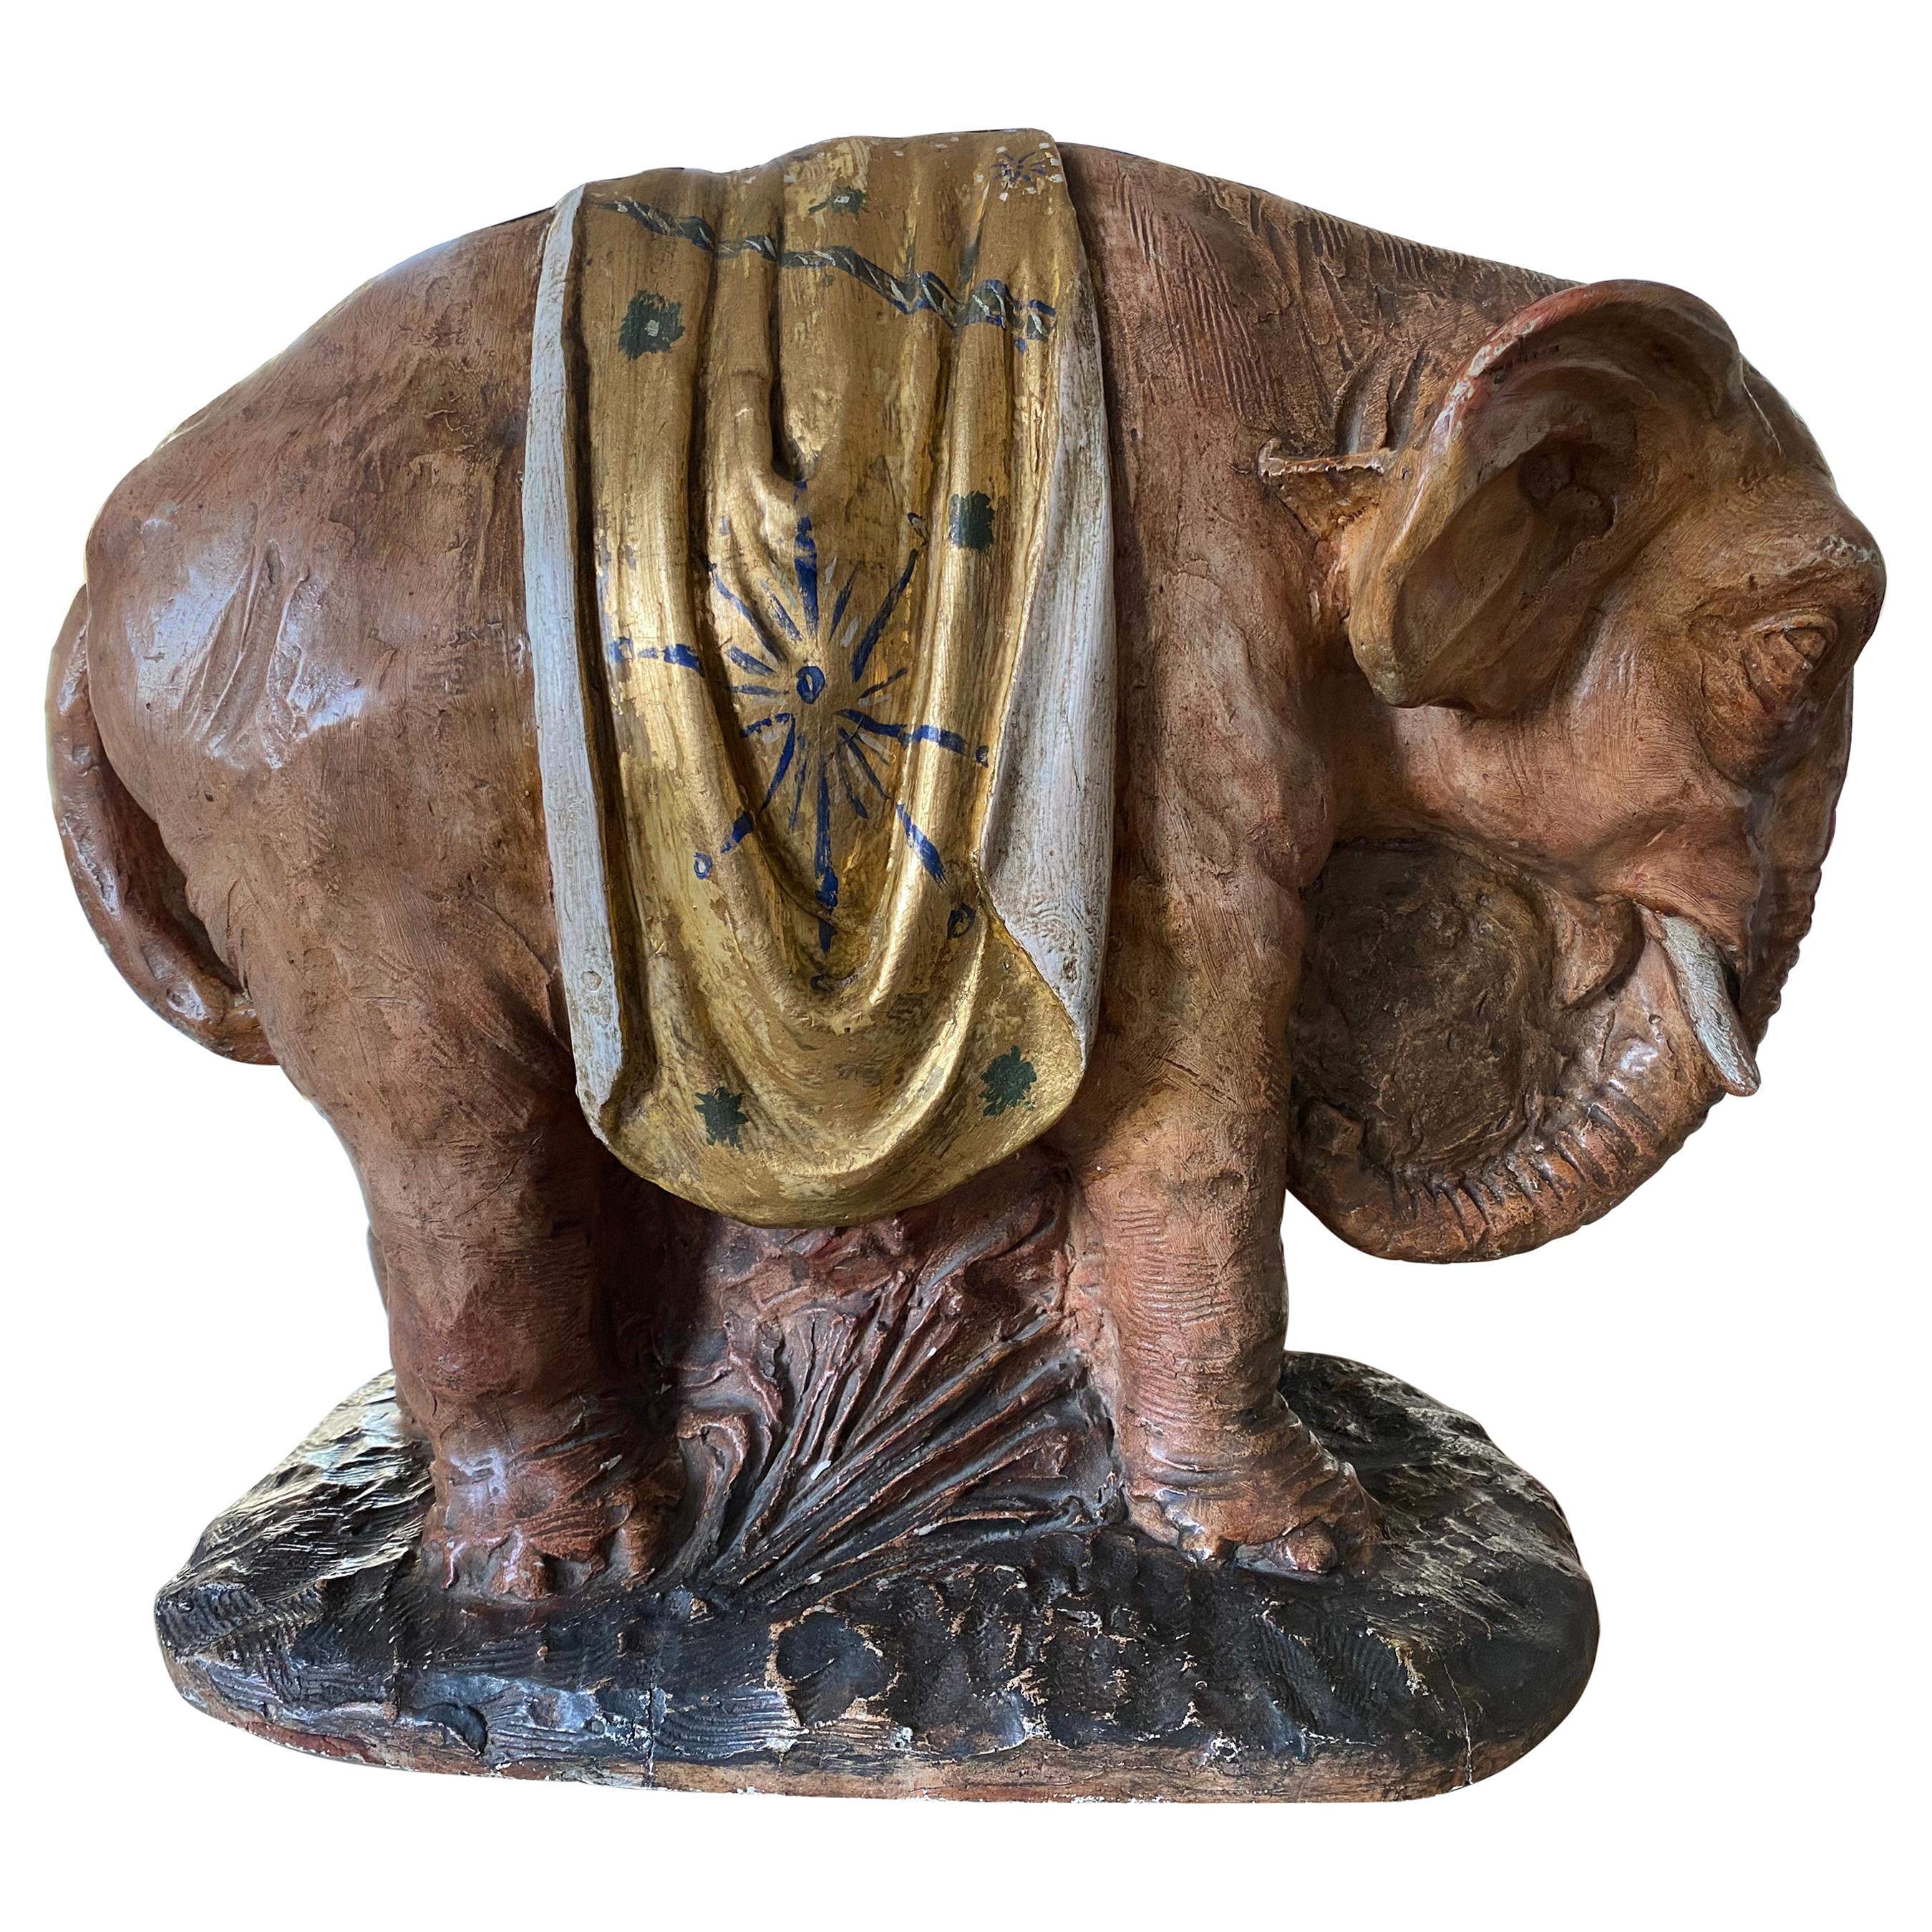 Exceptional "Elephant in Plaster" 1931 World's Fair